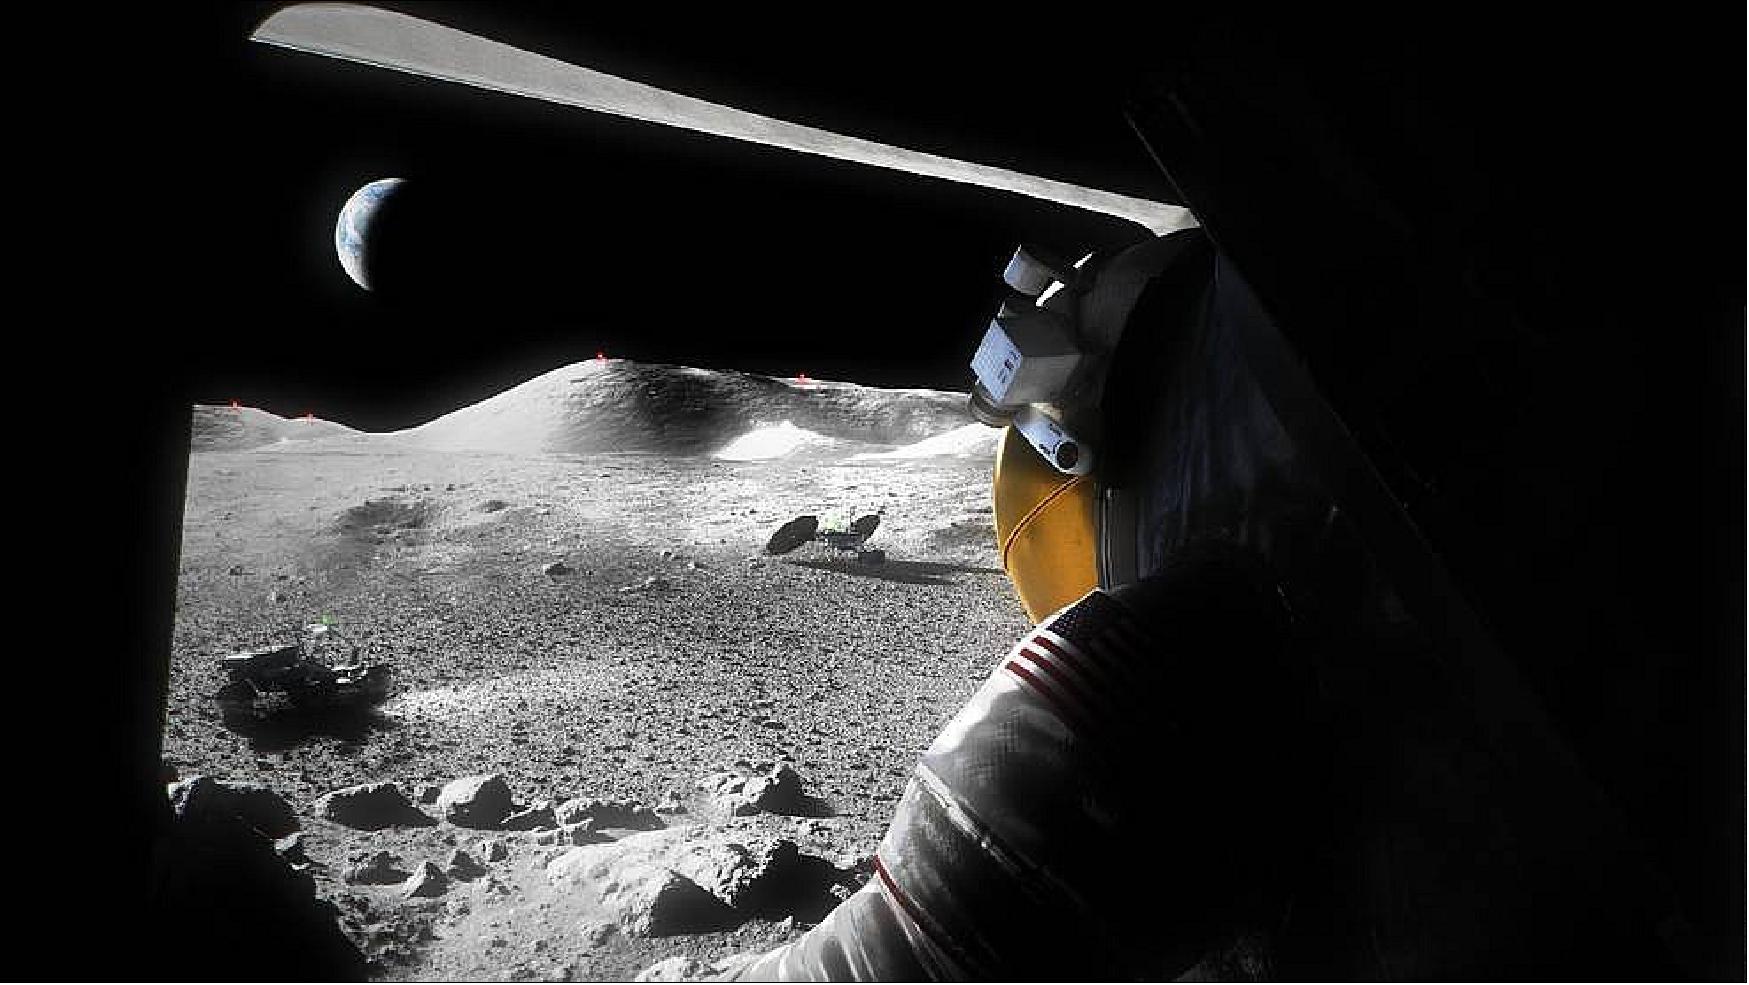 Figure 7: An illustration of a suited Artemis astronaut looking out of a Moon lander hatch across the lunar surface, the Lunar Terrain Vehicle and other surface elements (image credits: NASA)